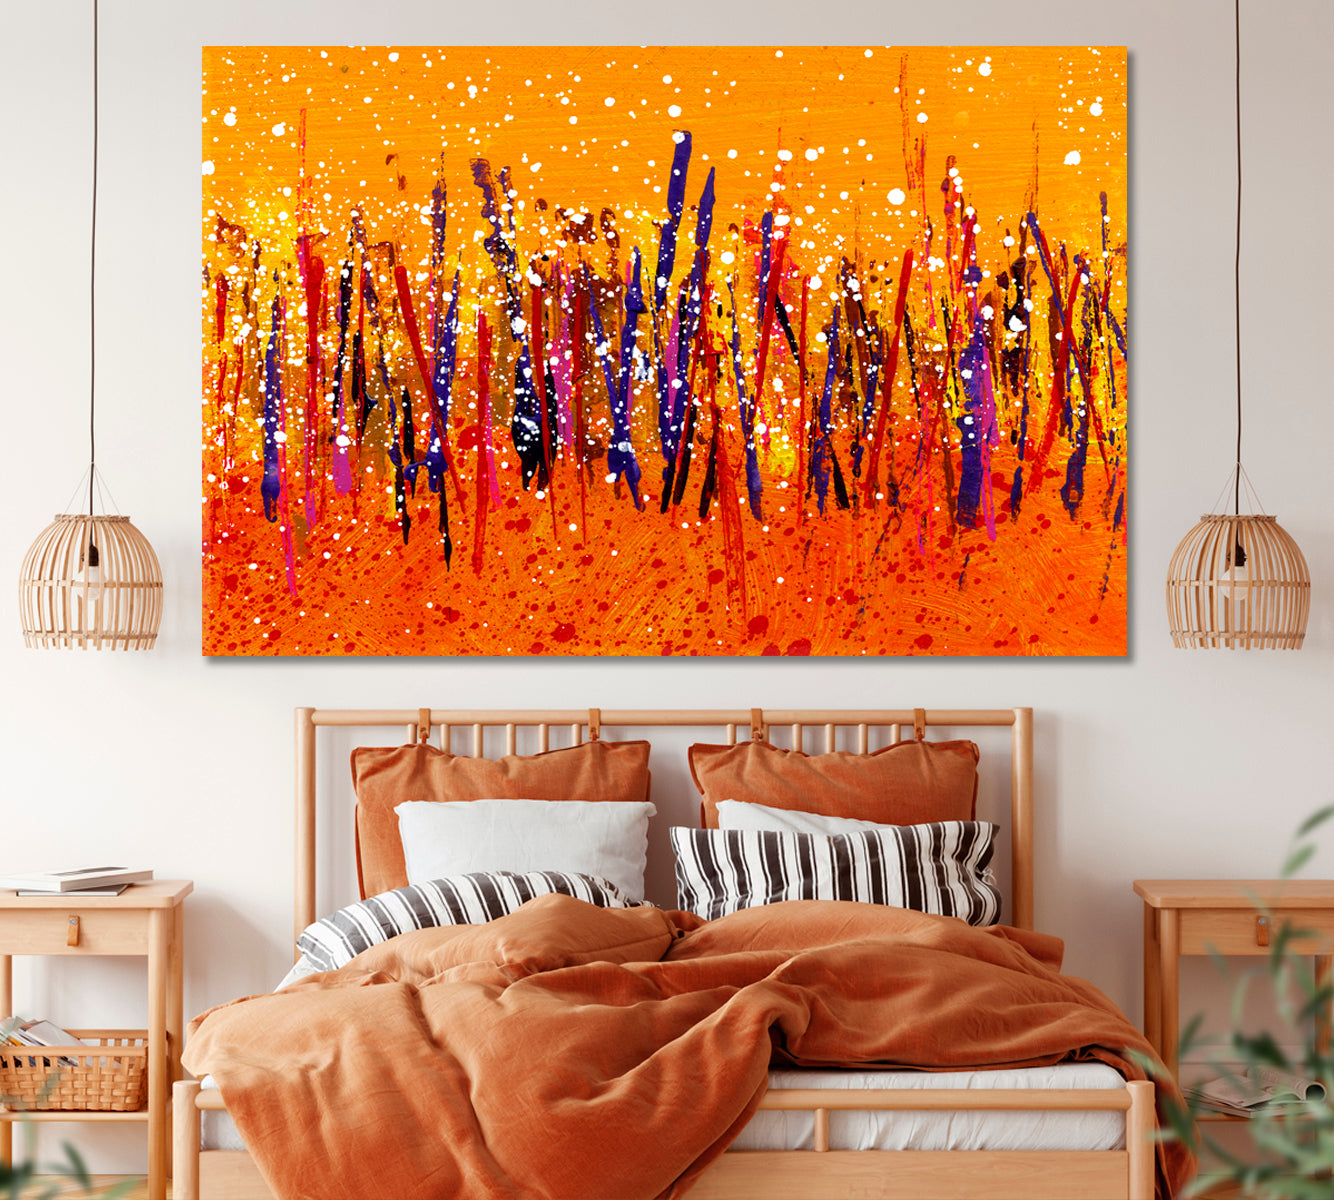 Abstract Vivid Brush Strokes Composition Canvas Print ArtLexy 1 Panel 24"x16" inches 